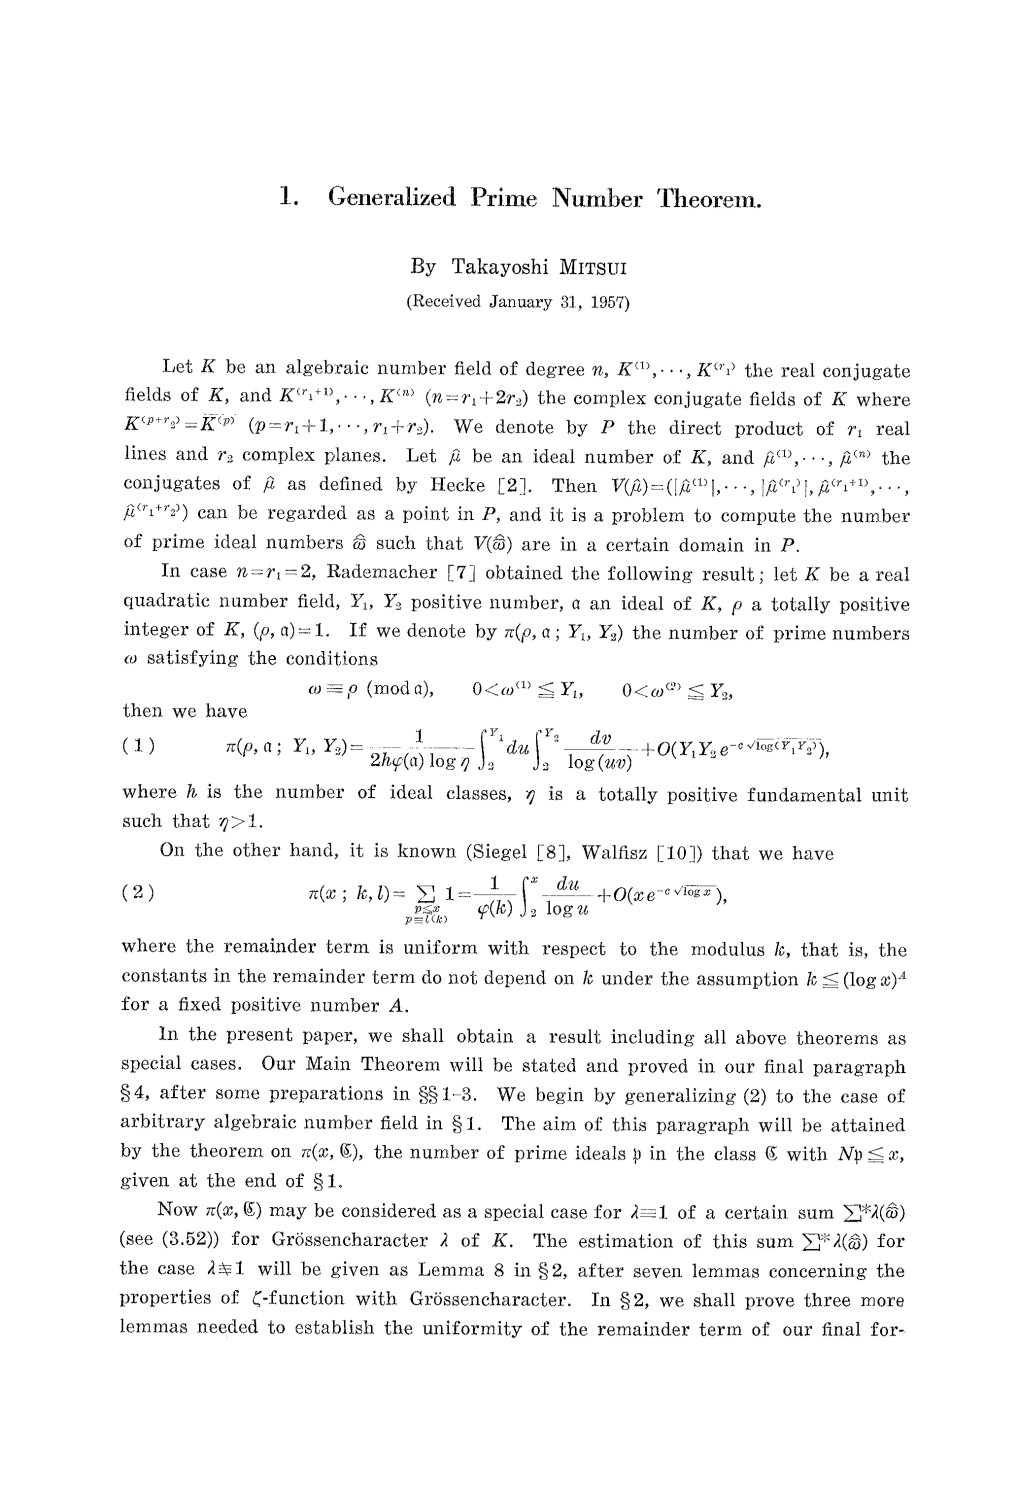 1. Generalized Prime Number Theorem. by Takayoshi MITSUI